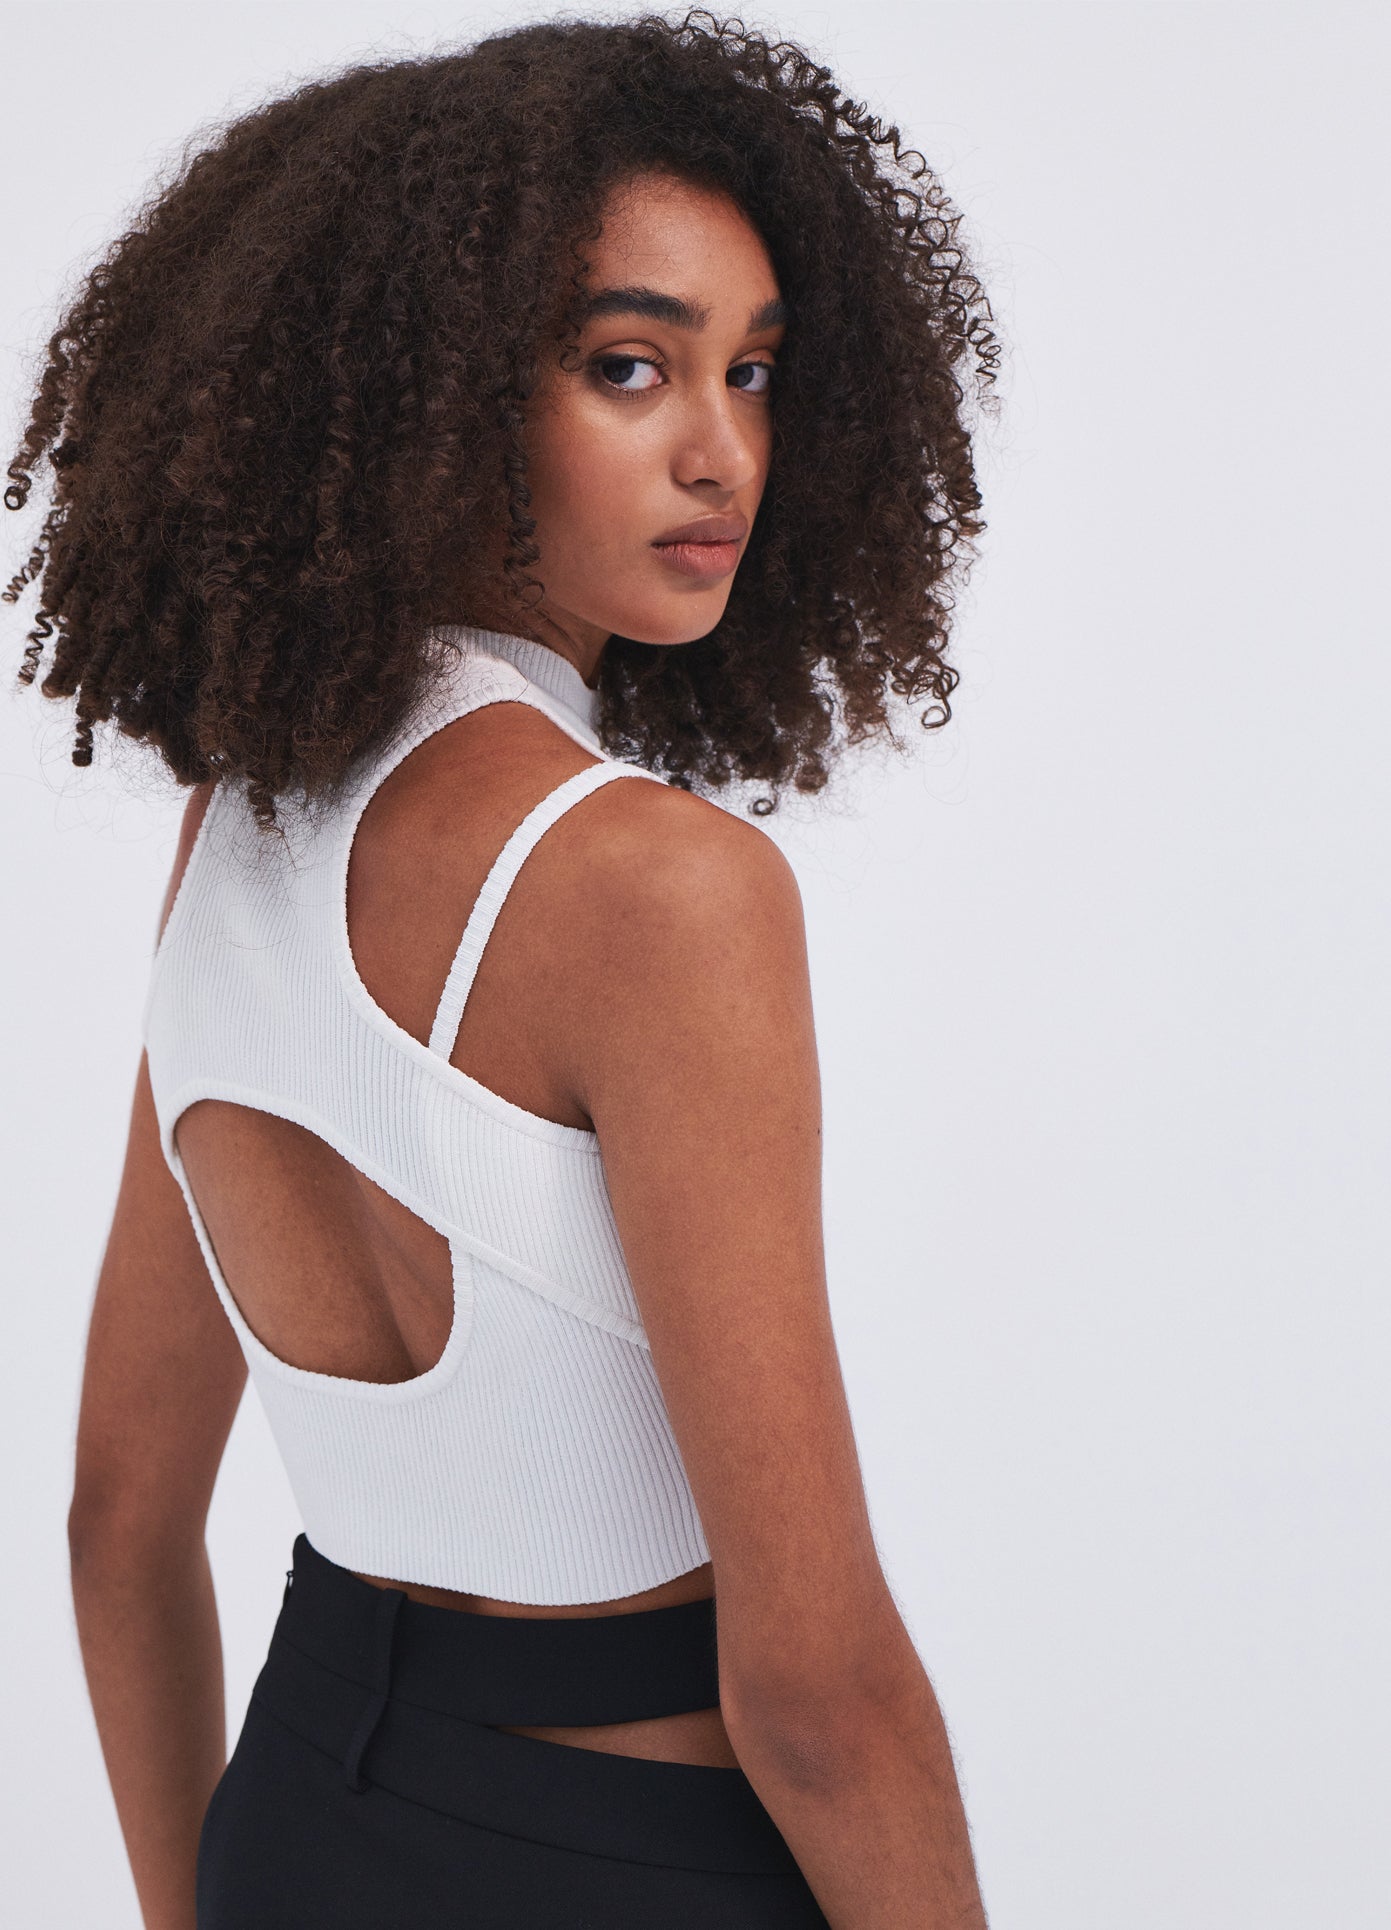 MONSE Halter Neck Knit Cropped Top in Ivory on model back view